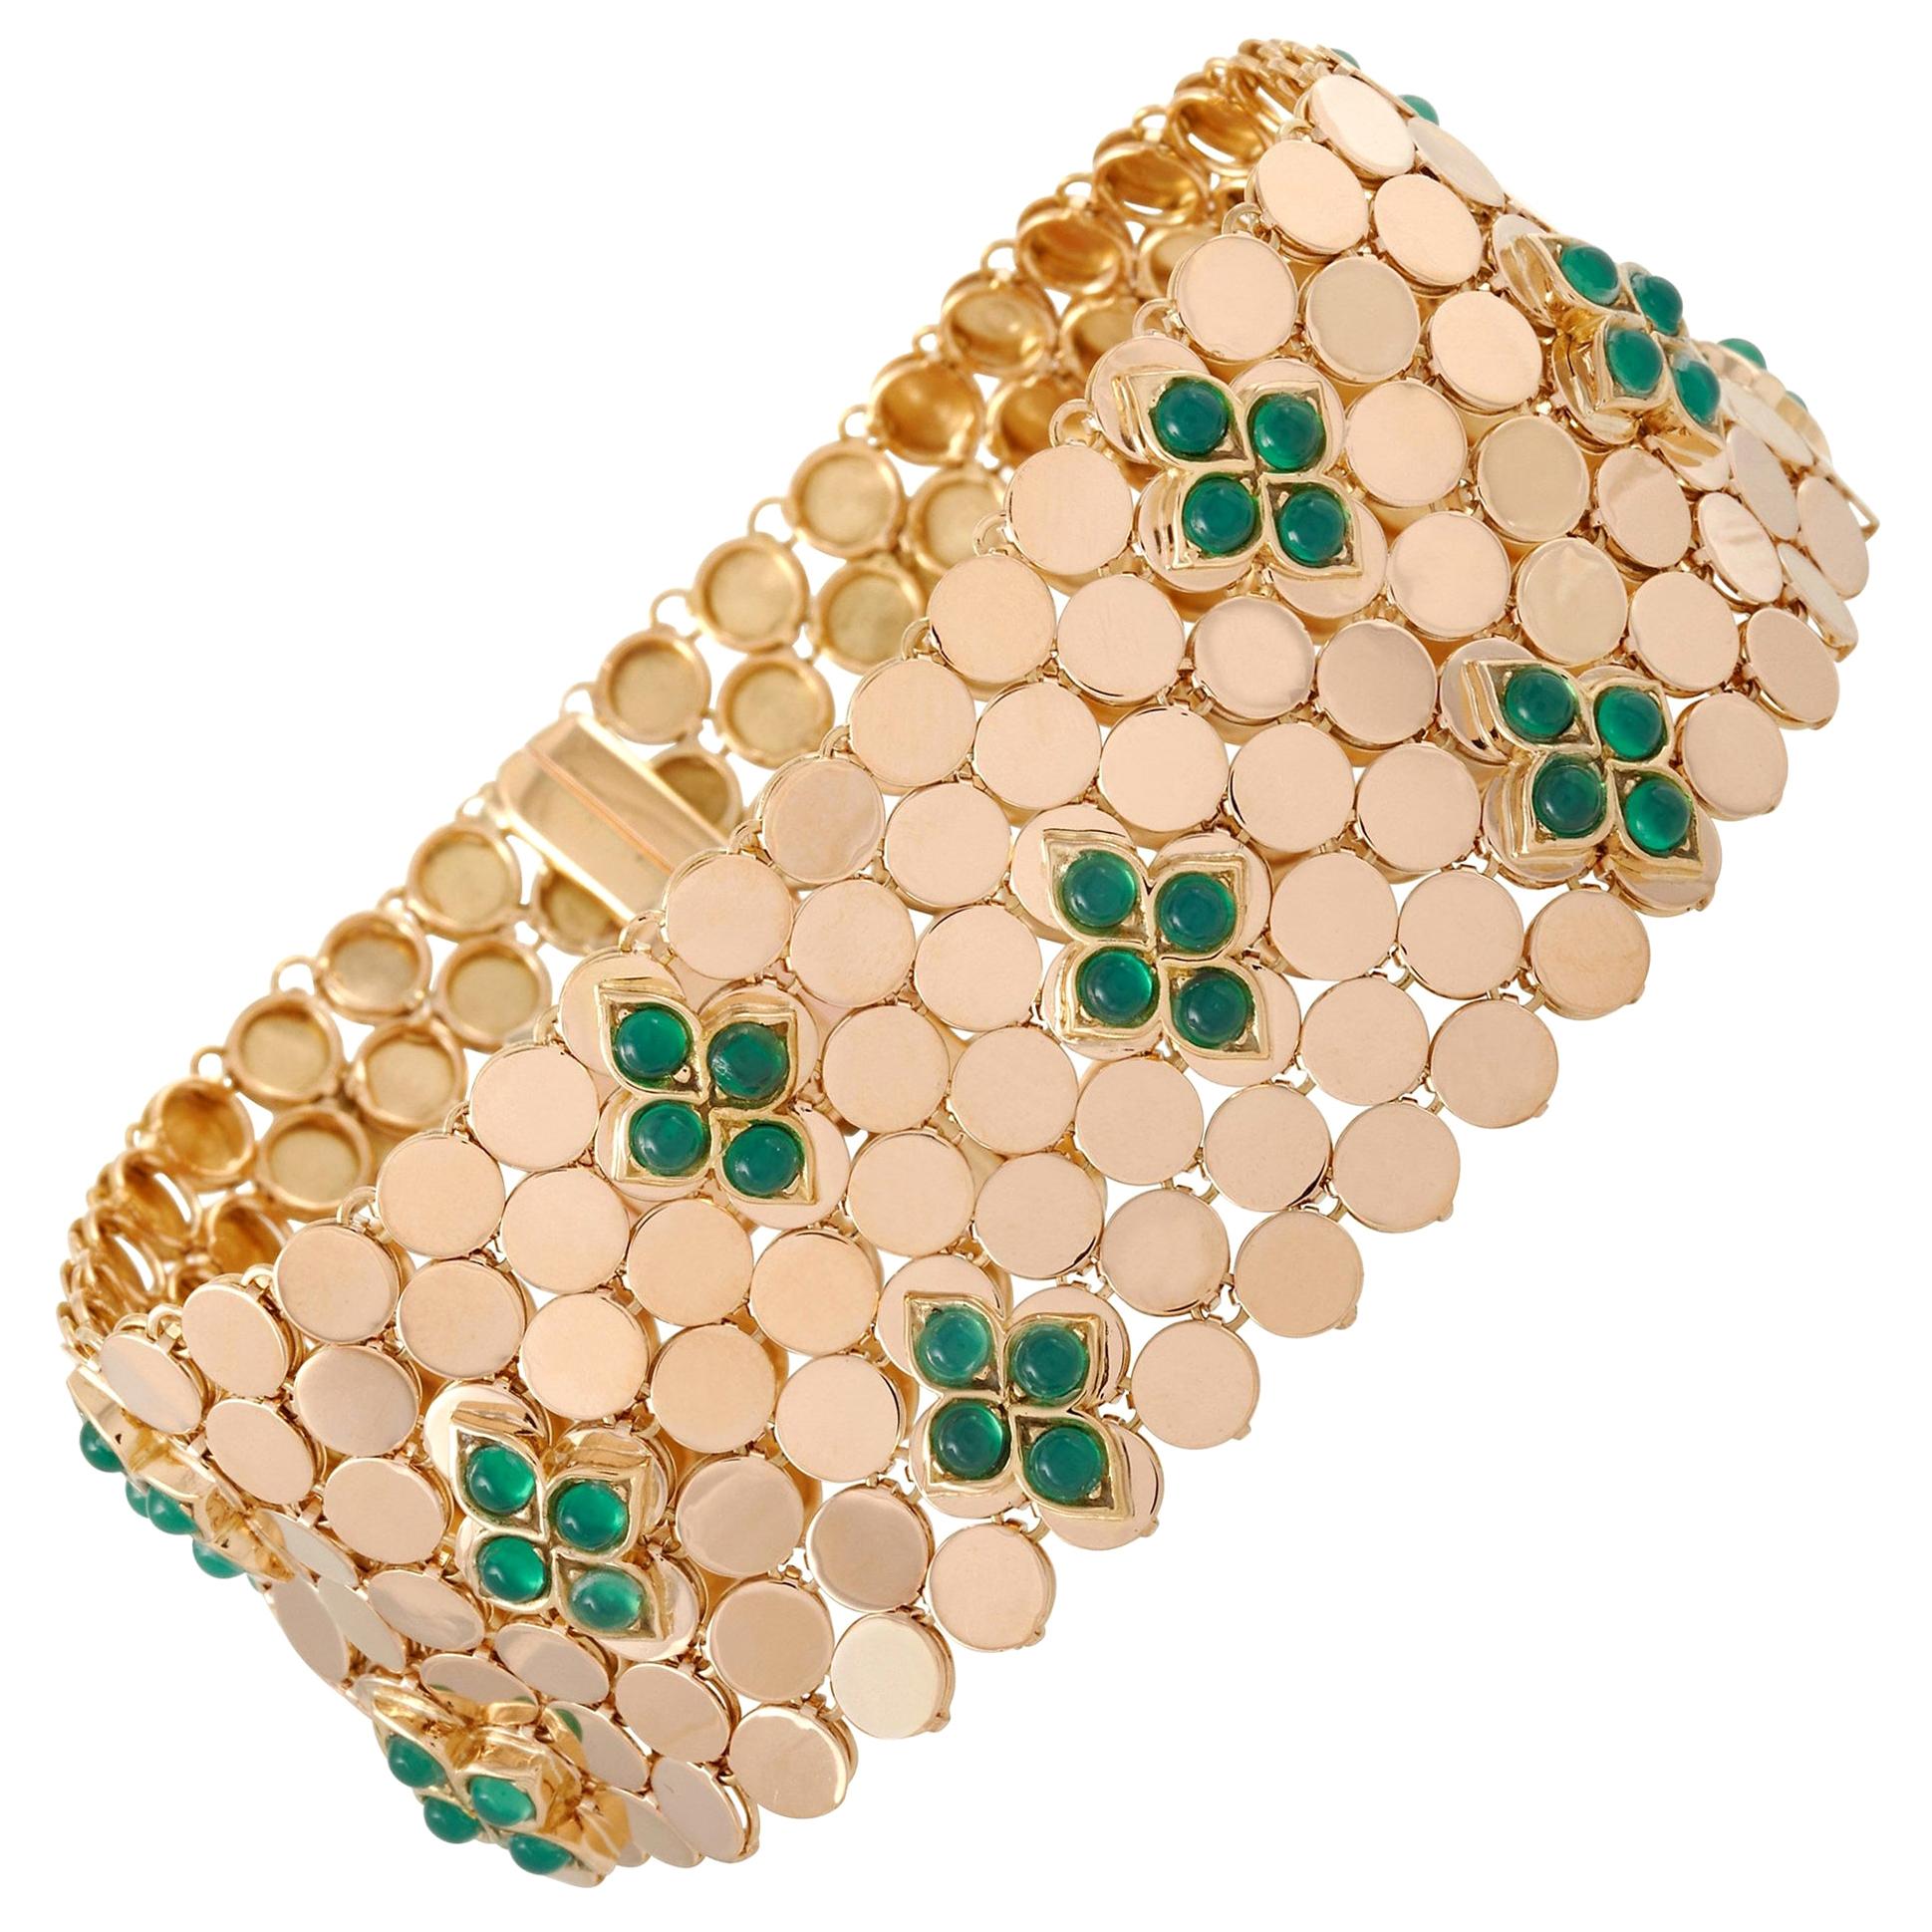 The Van Cleef & Arpels Vintage 18K Yellow Gold Emerald Mesh Bracelet has that ever-desirable poise and elegance of VCA. This wide bracelet features a mosaic of small 18K yellow gold circles making up an openwork structure that delicately caresses